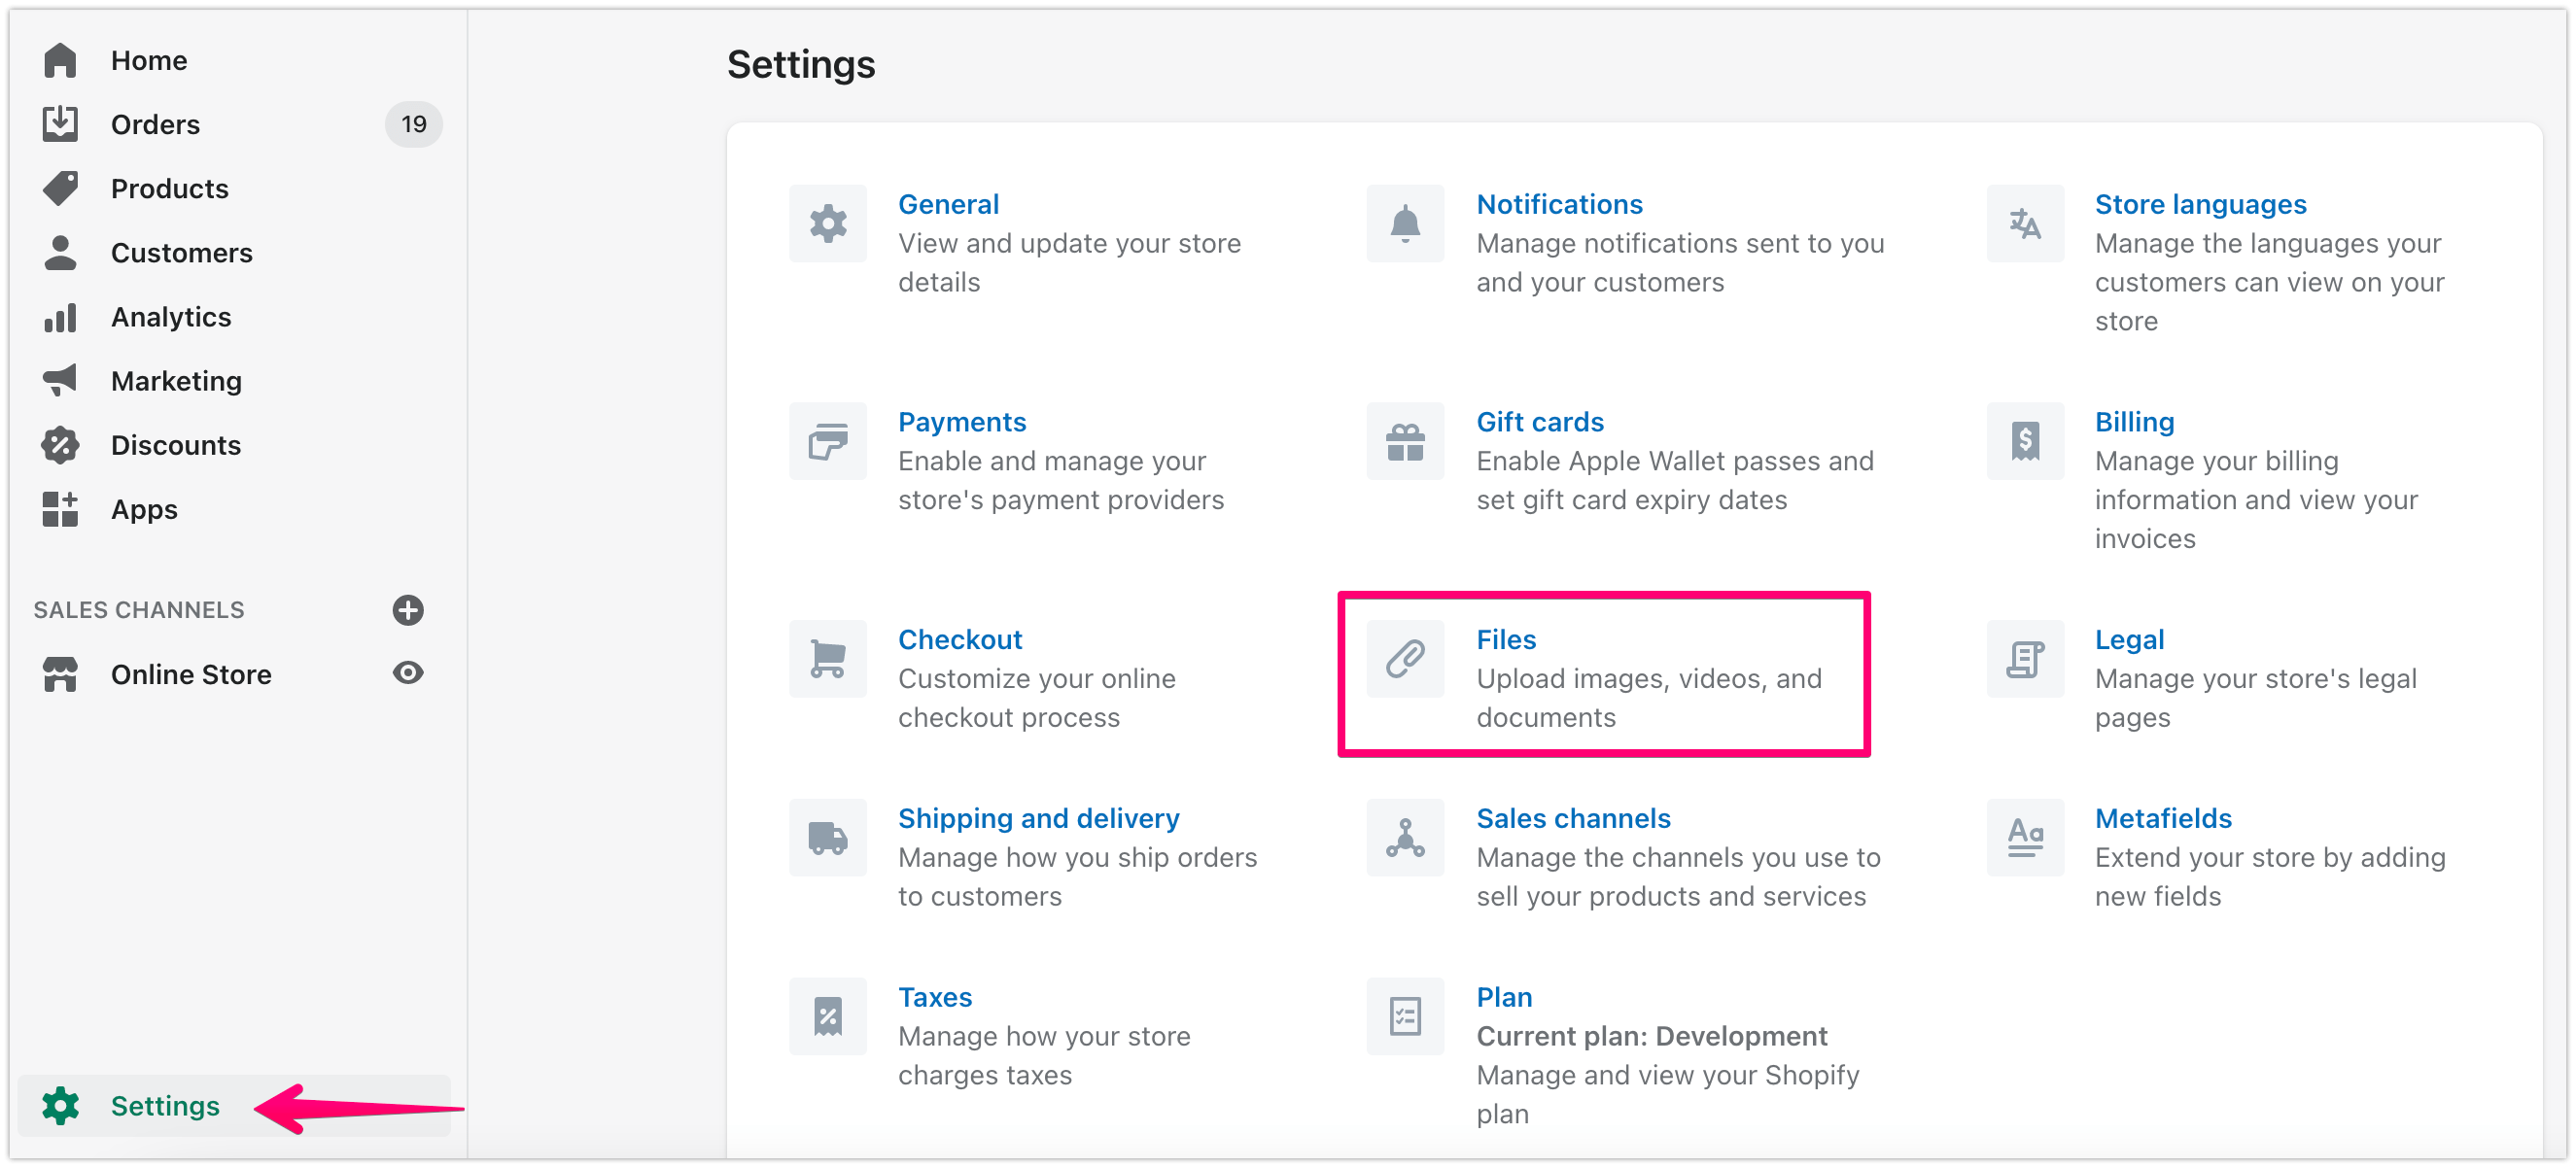 Shopify admin user interface showing the Settings section.